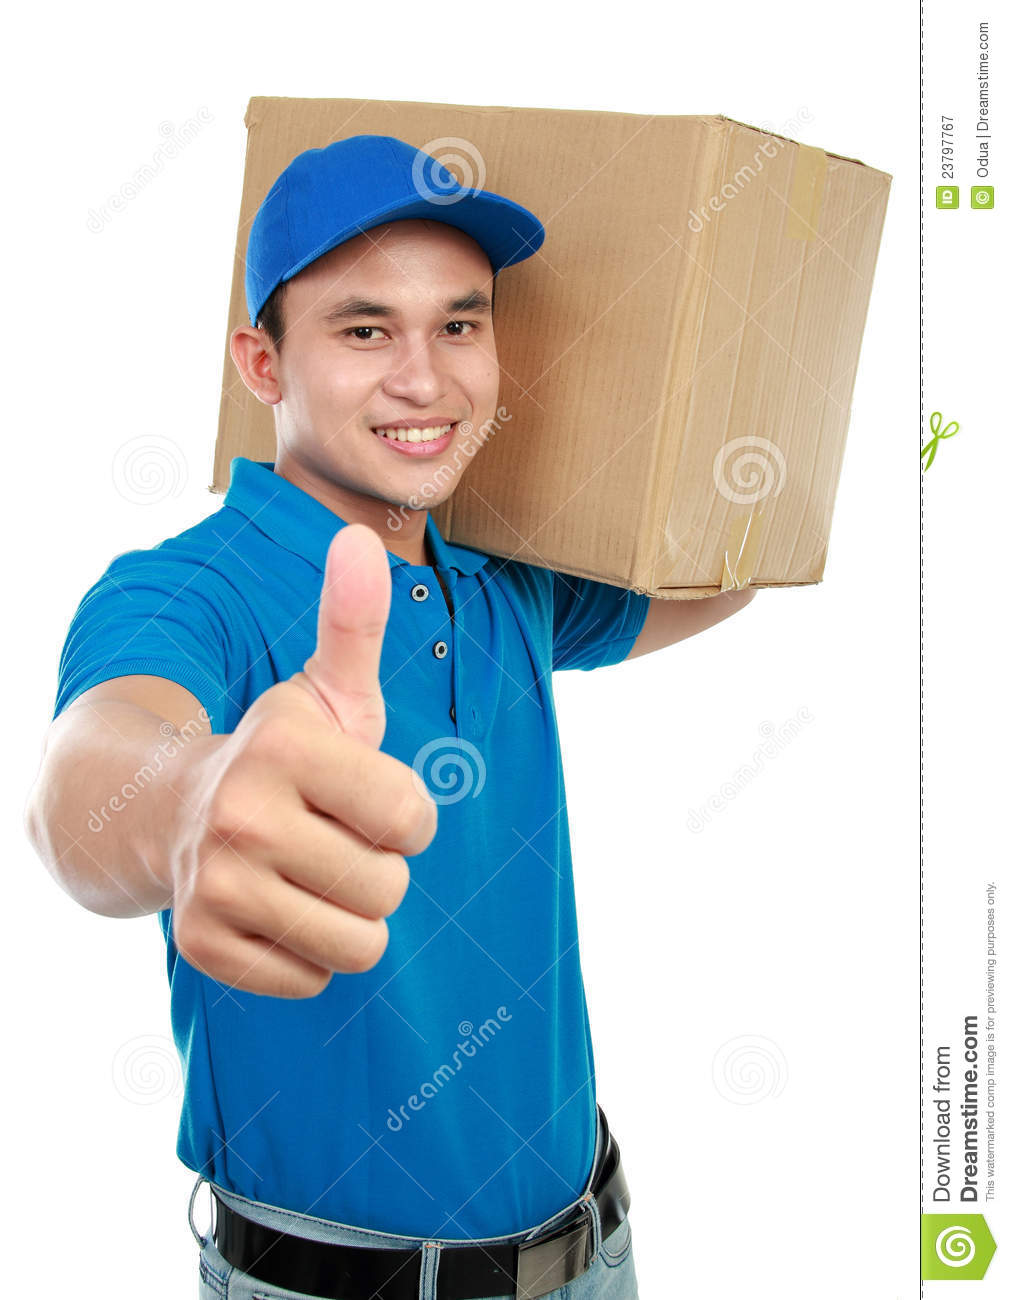 Delivery Man Pics, Movie Collection